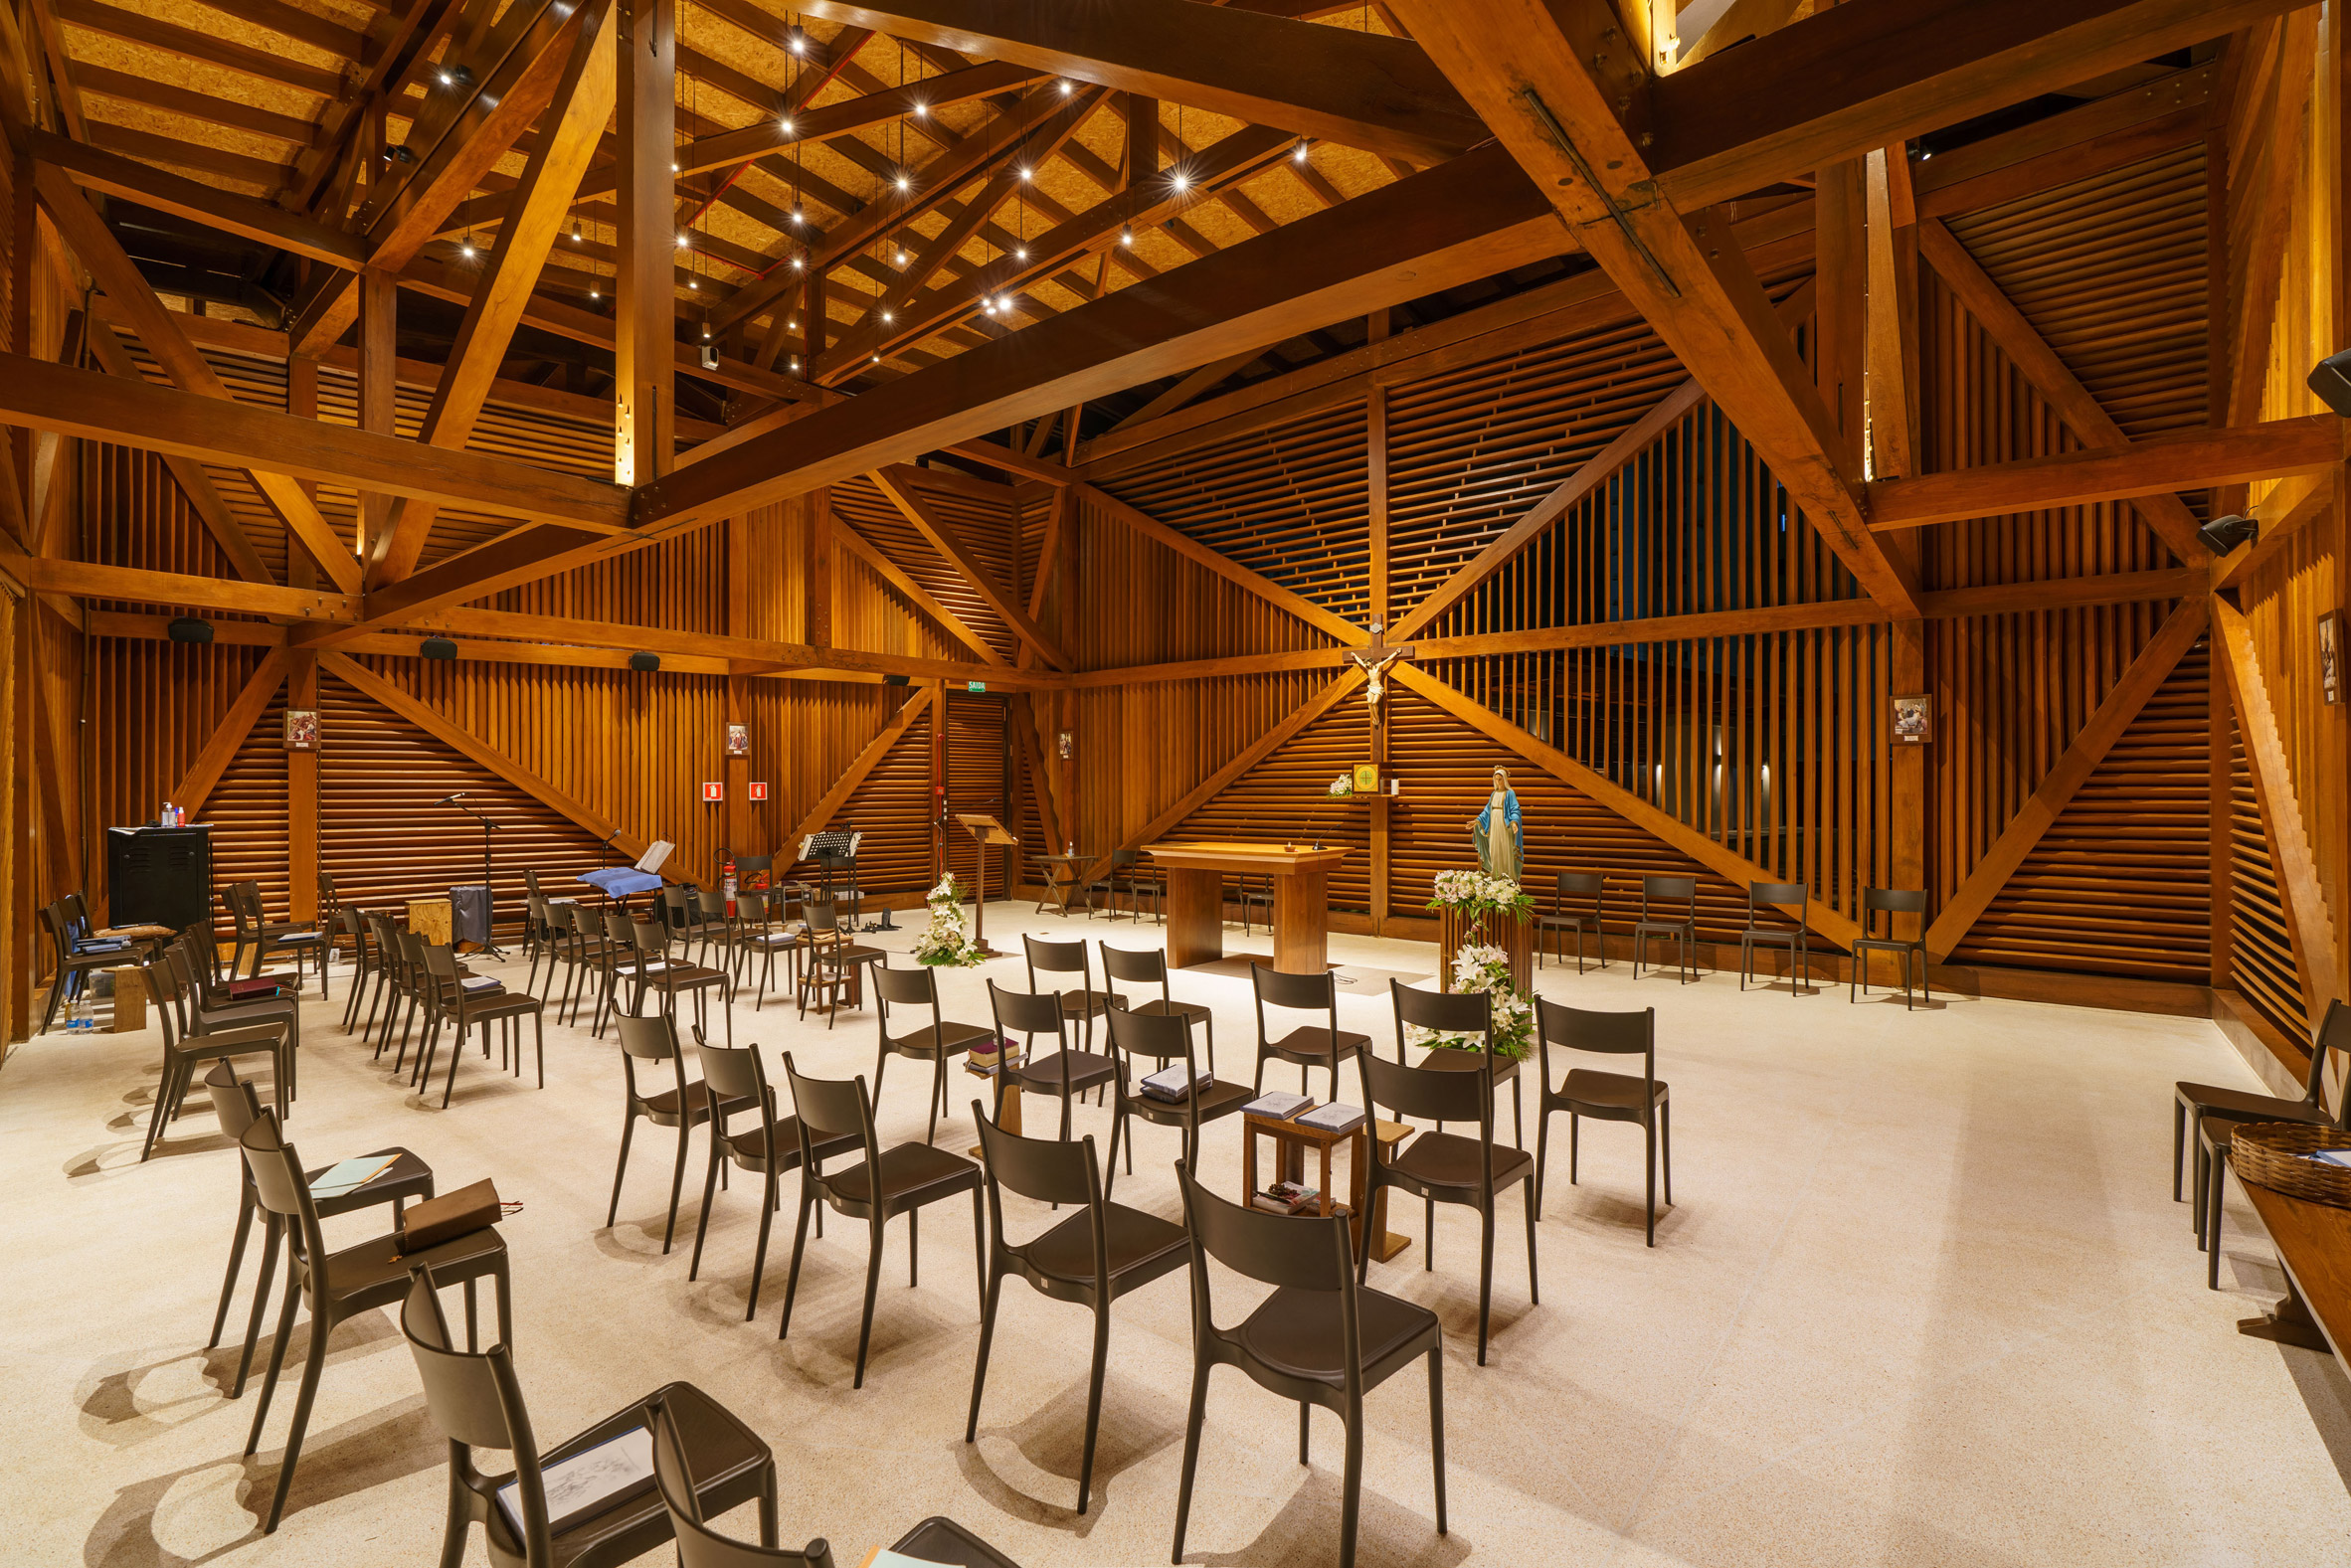 Wood-clad interior for worship space